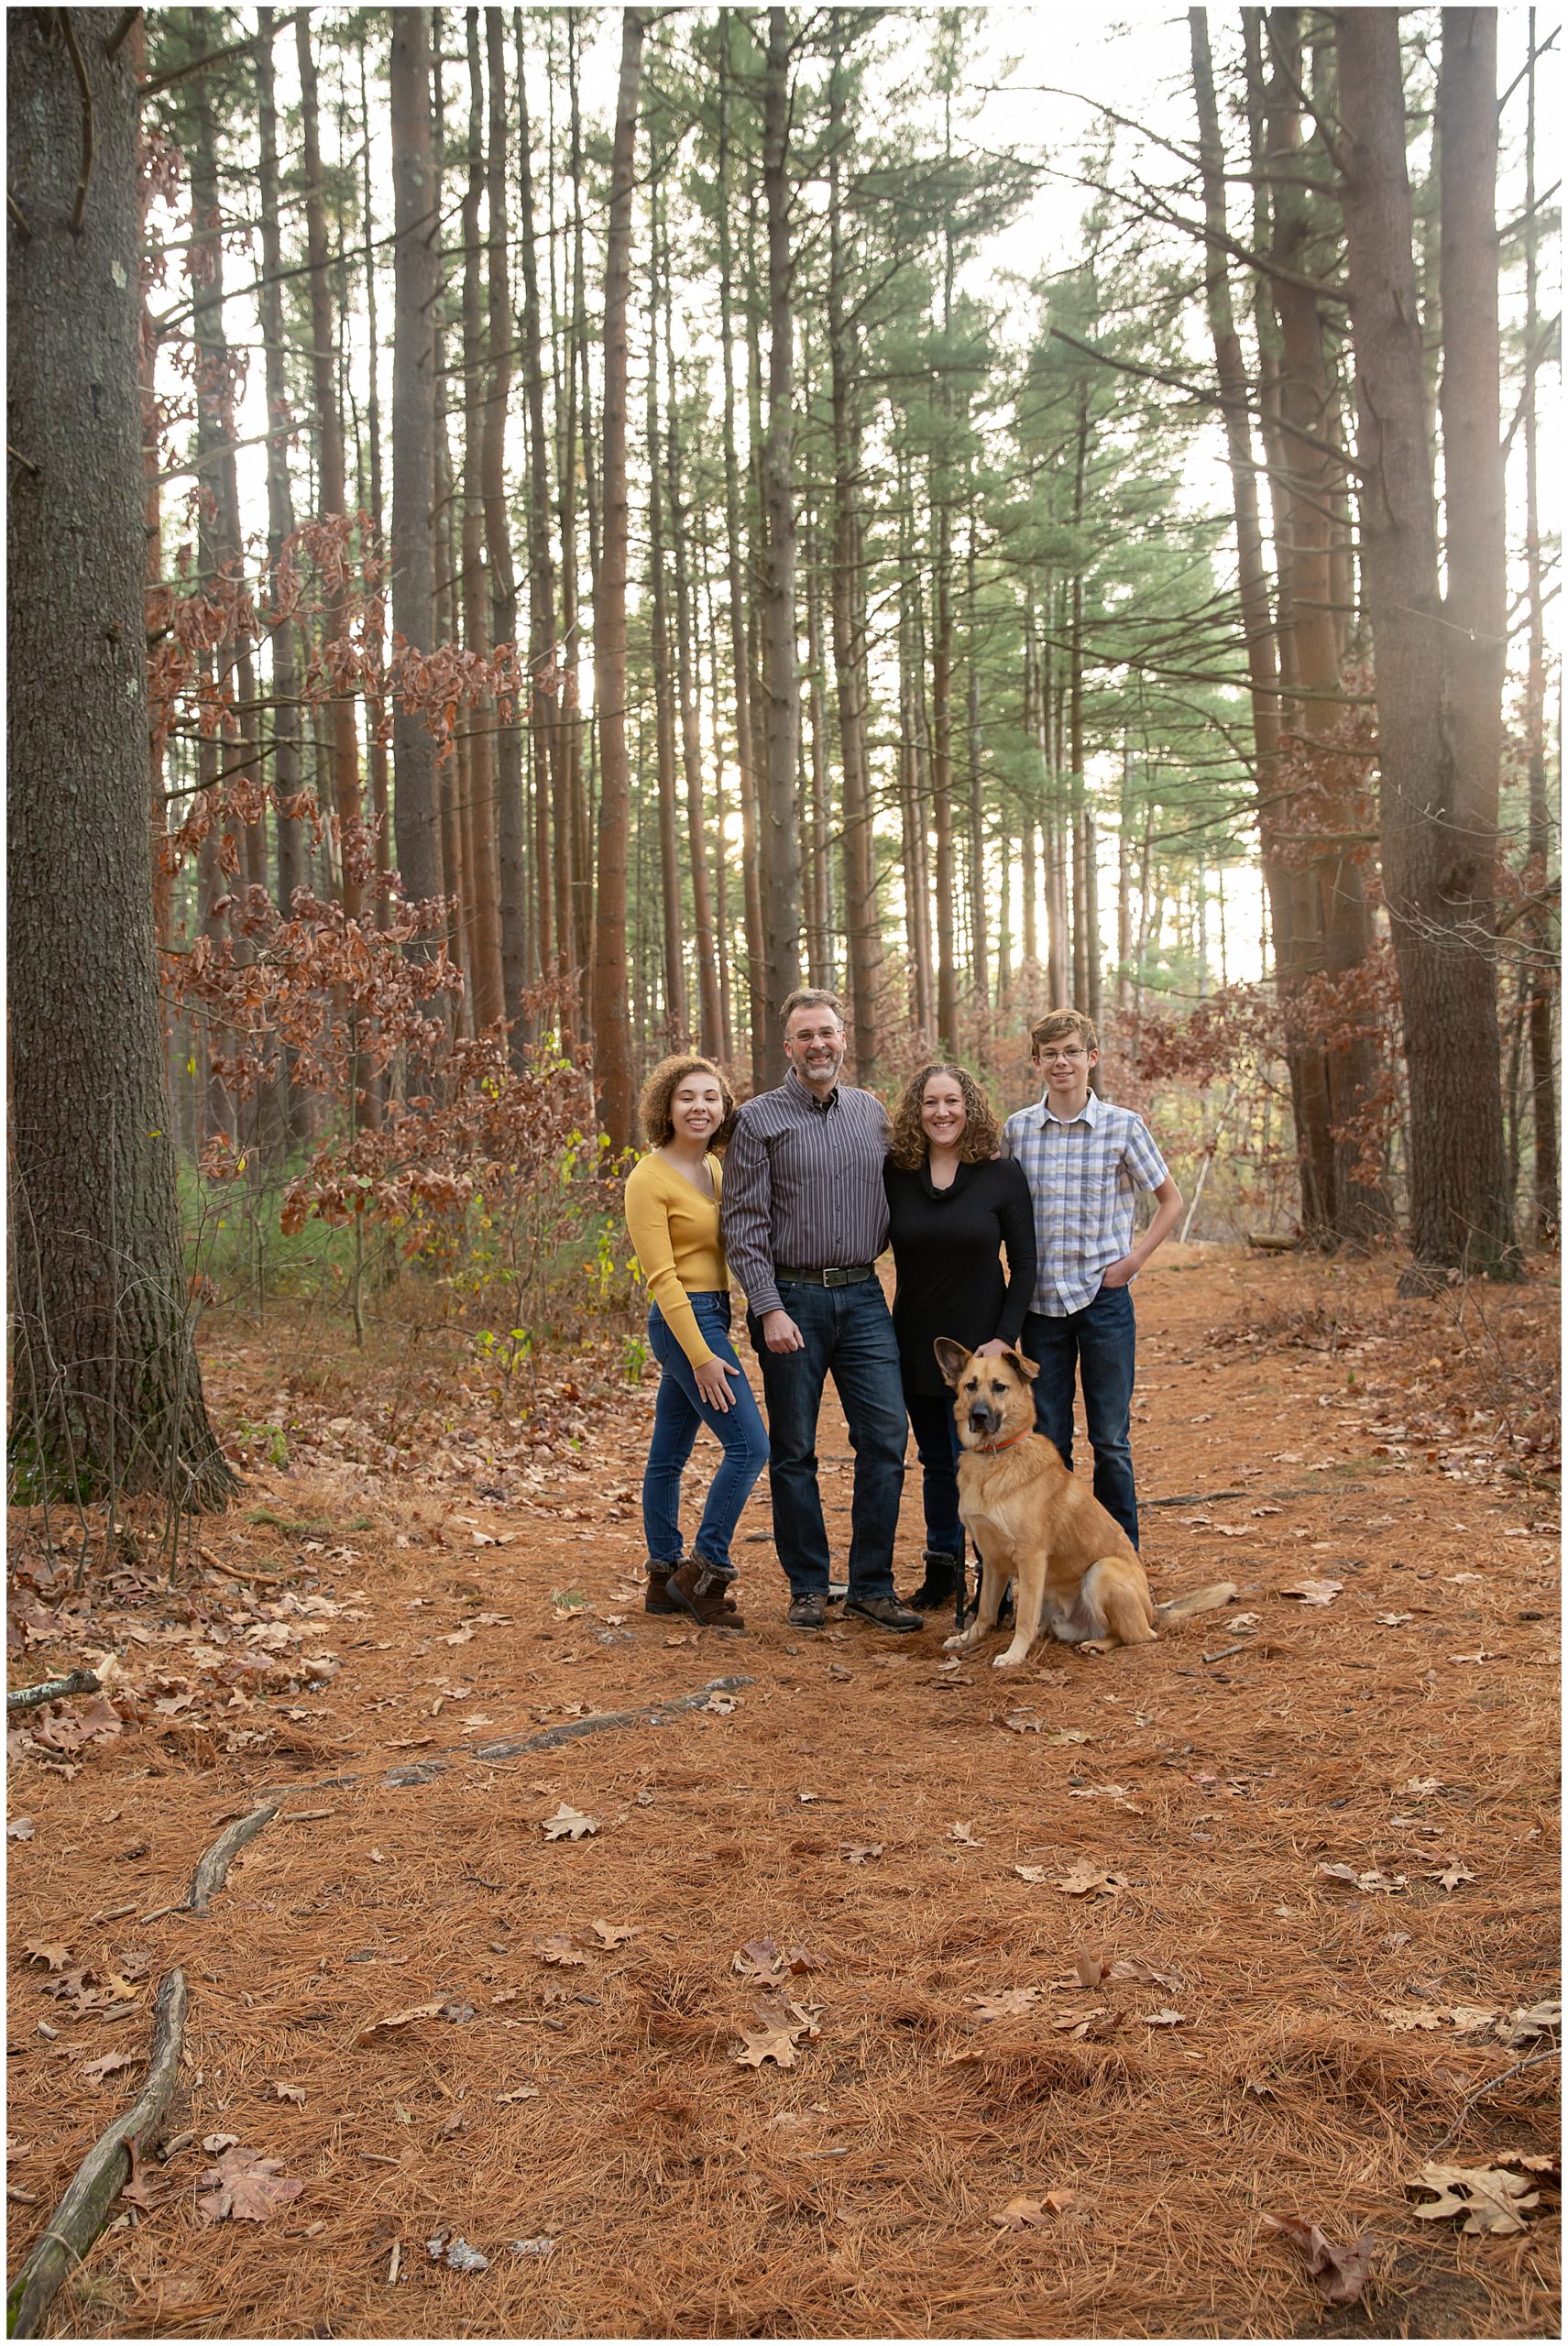 A family poses in the woods with their dogs